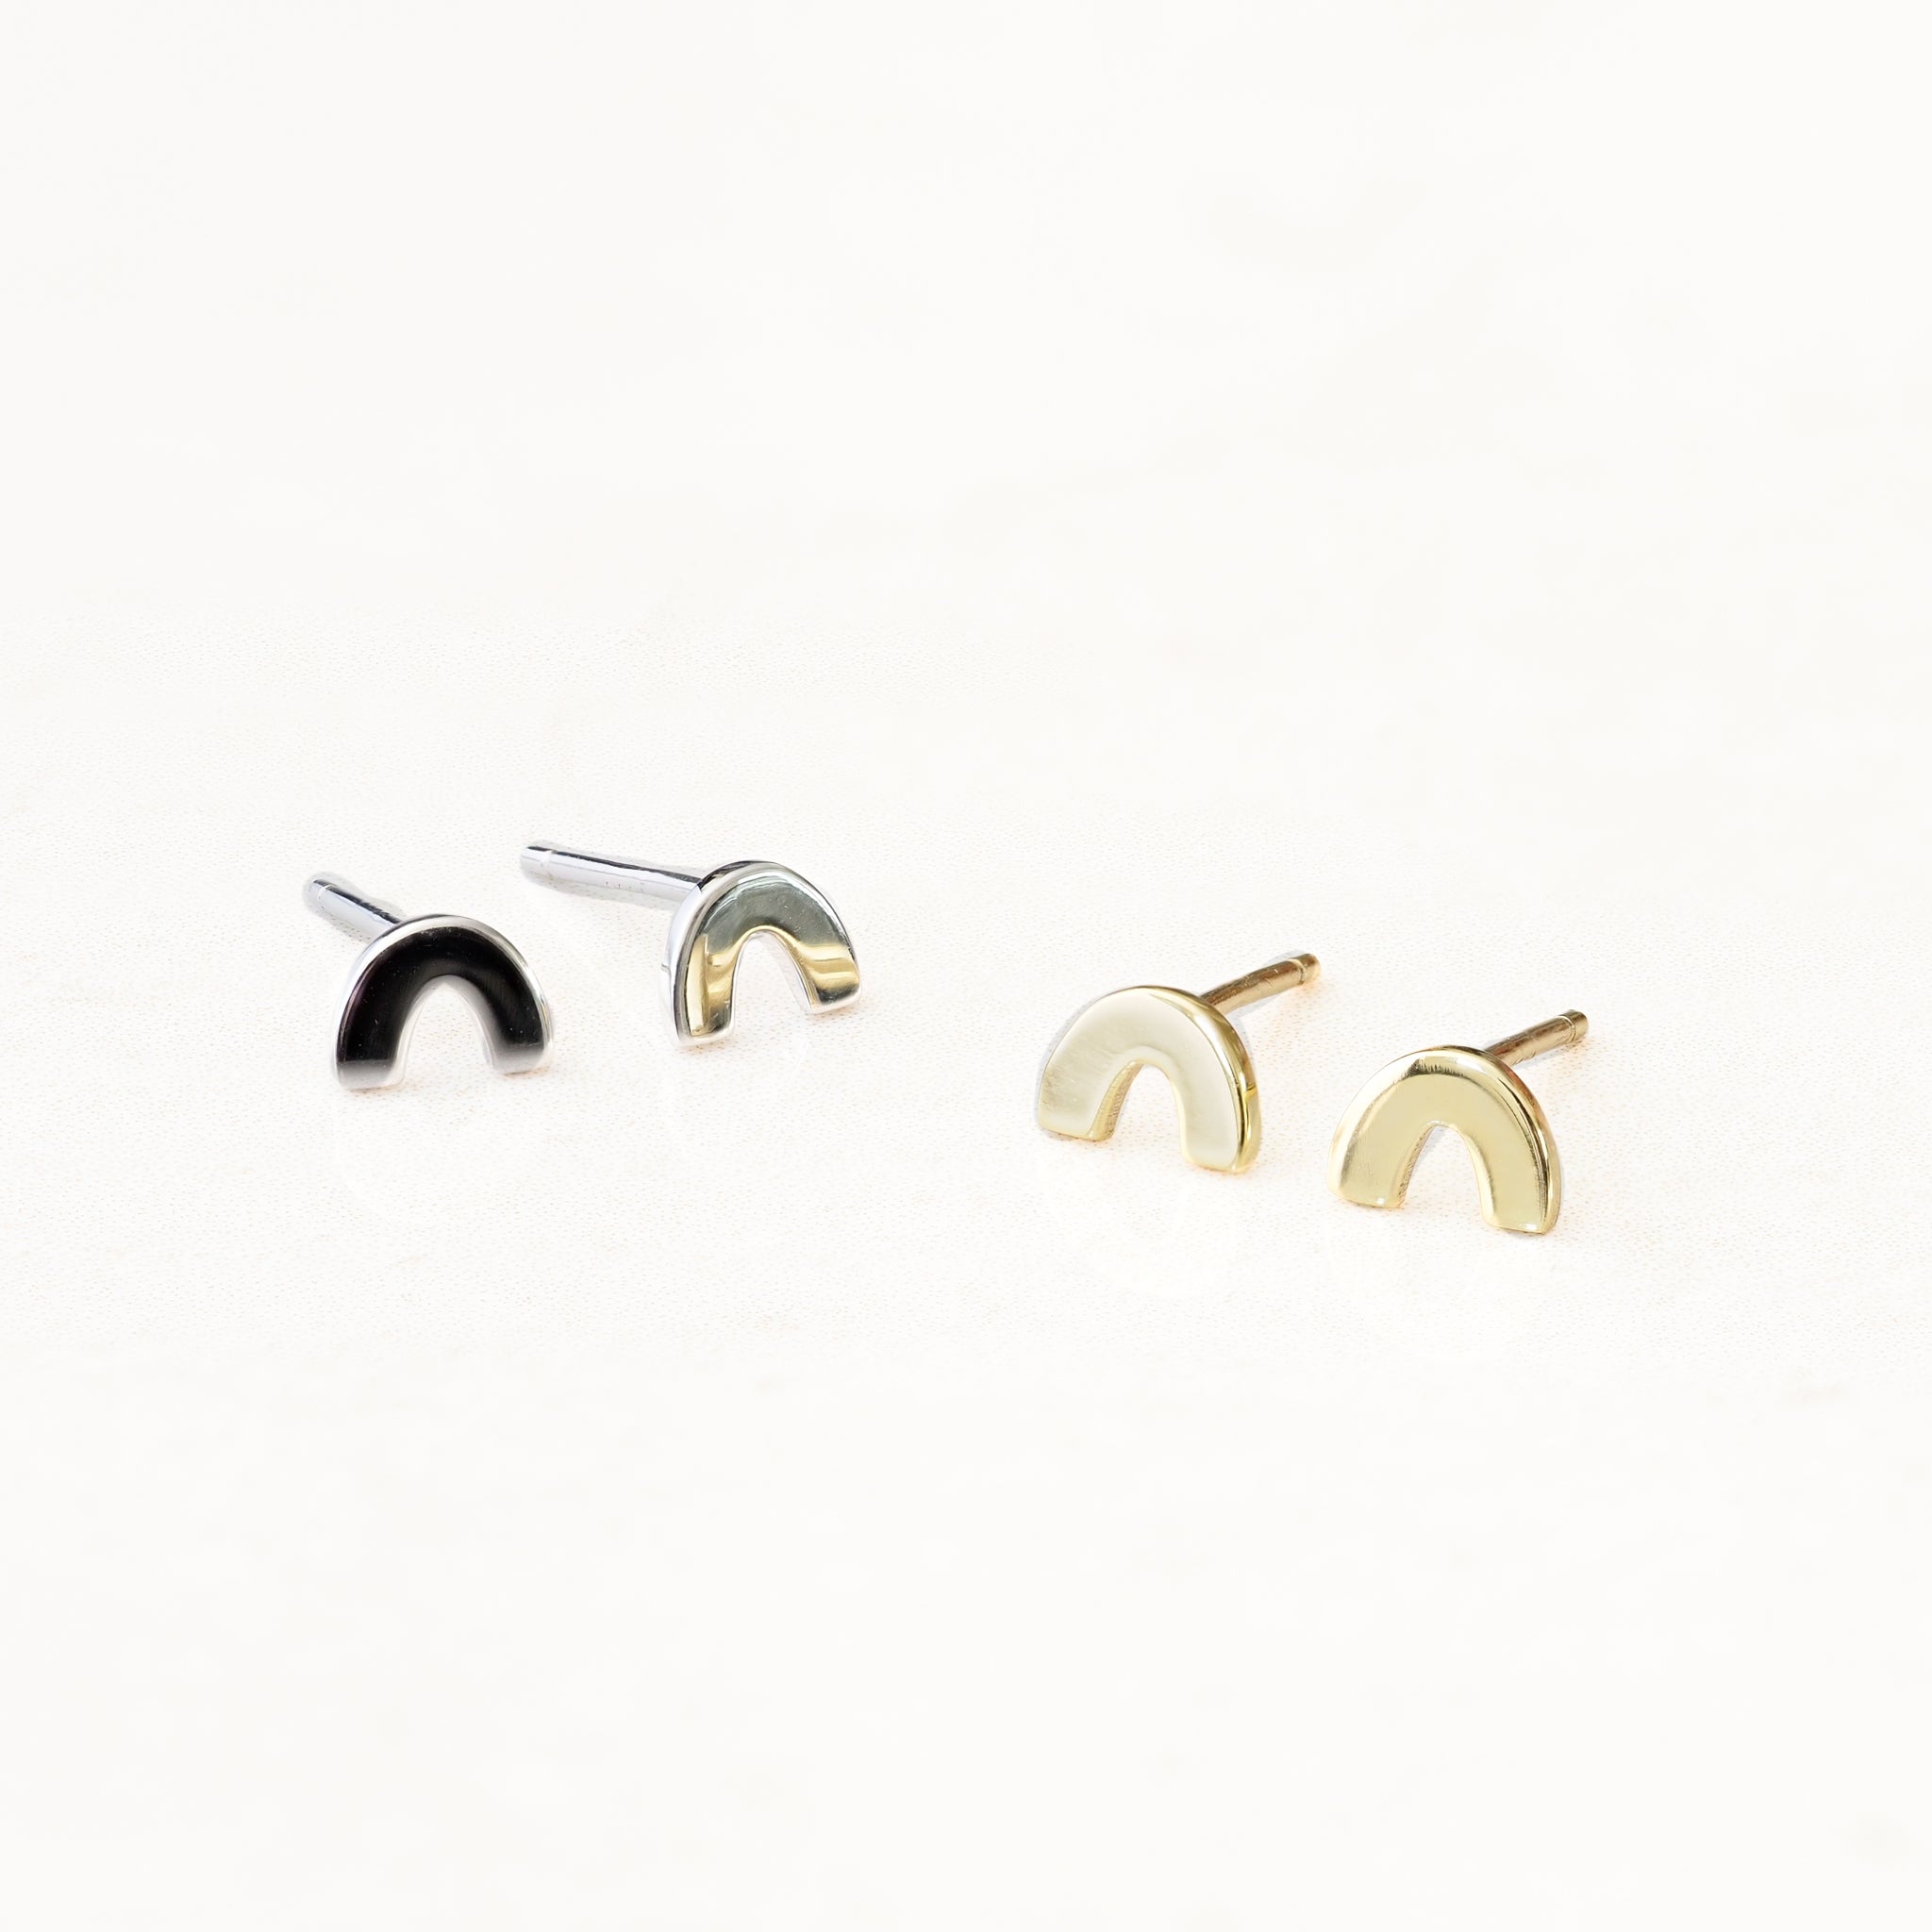 rainbow shape earrings, polished, gold and silver